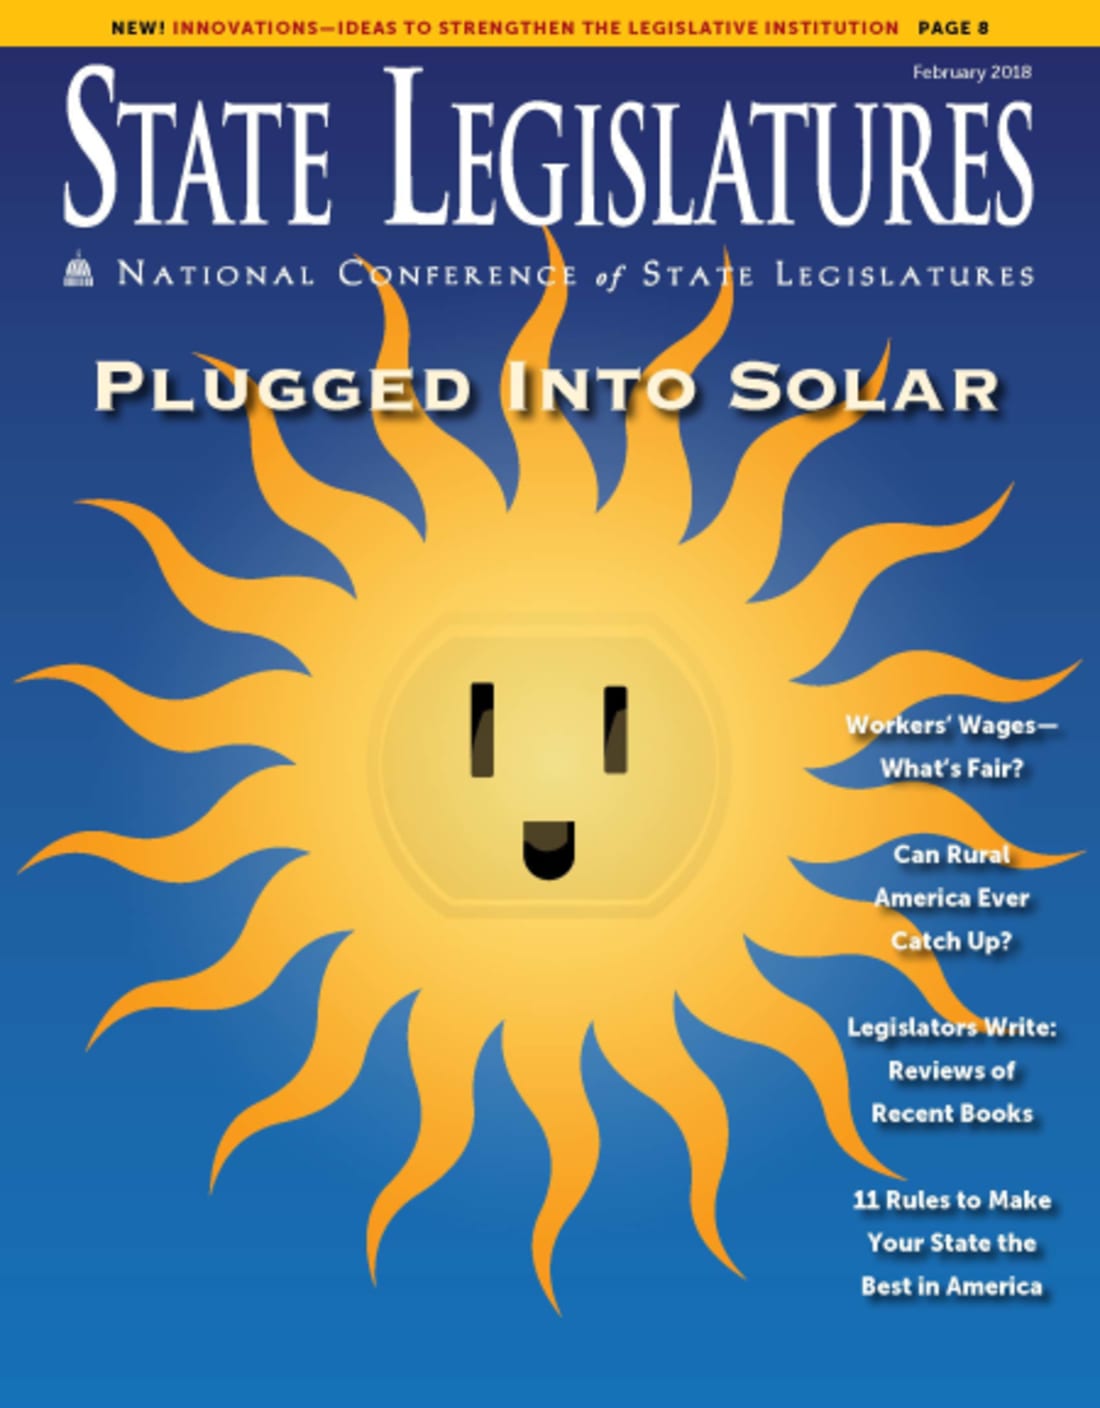 Cover of the February 2018 issue